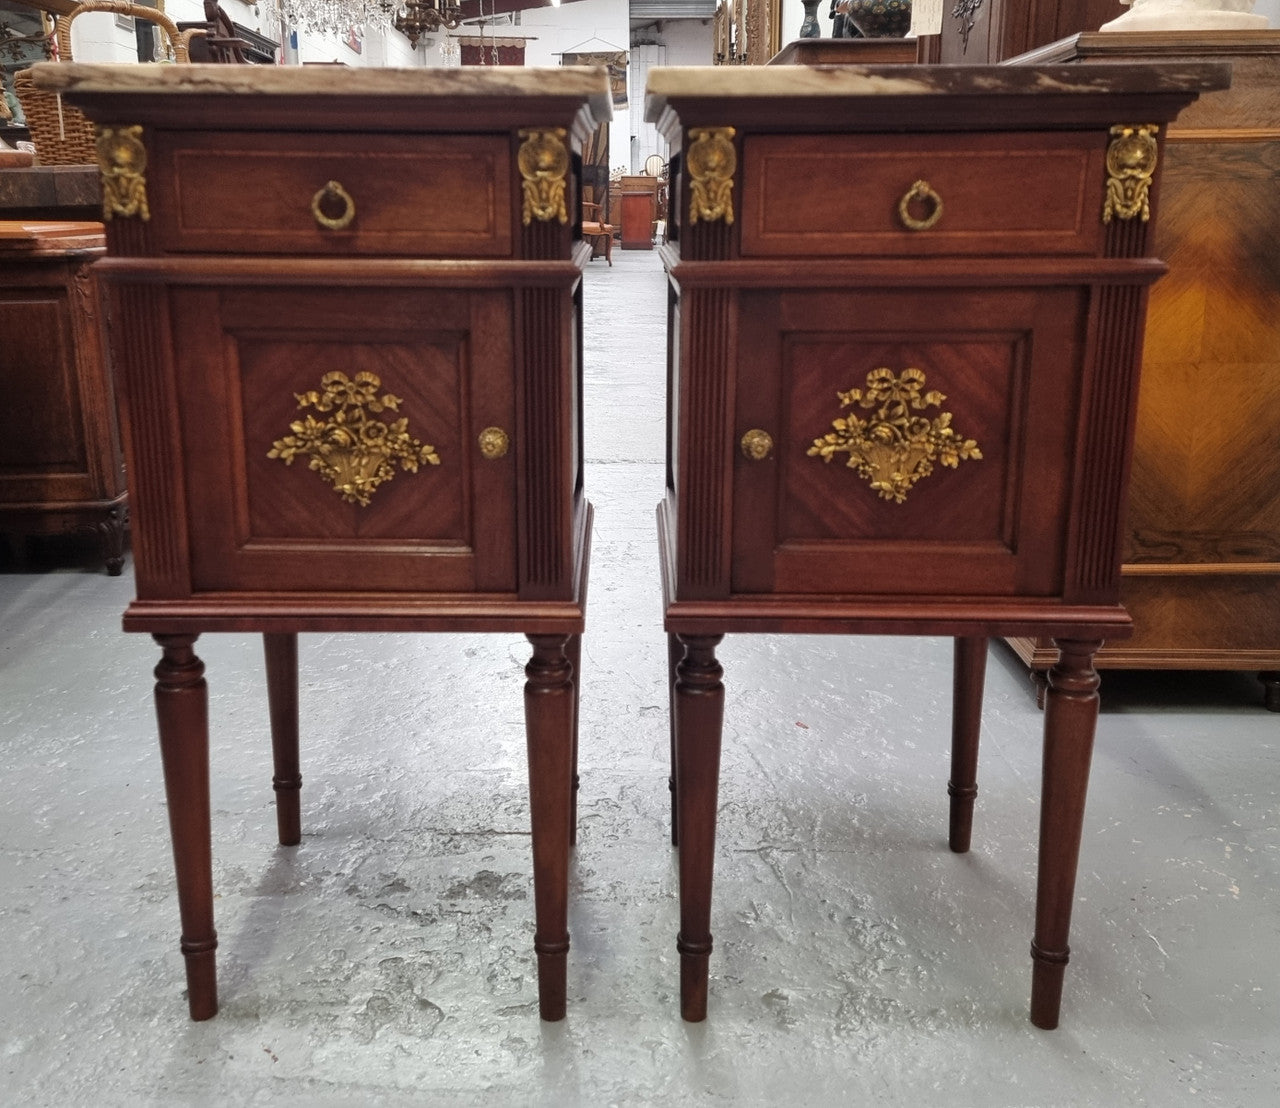 Pair of Louis XVI Style Mahogany Bedsides with Marble Tops and Impressive Ormolu Mounts